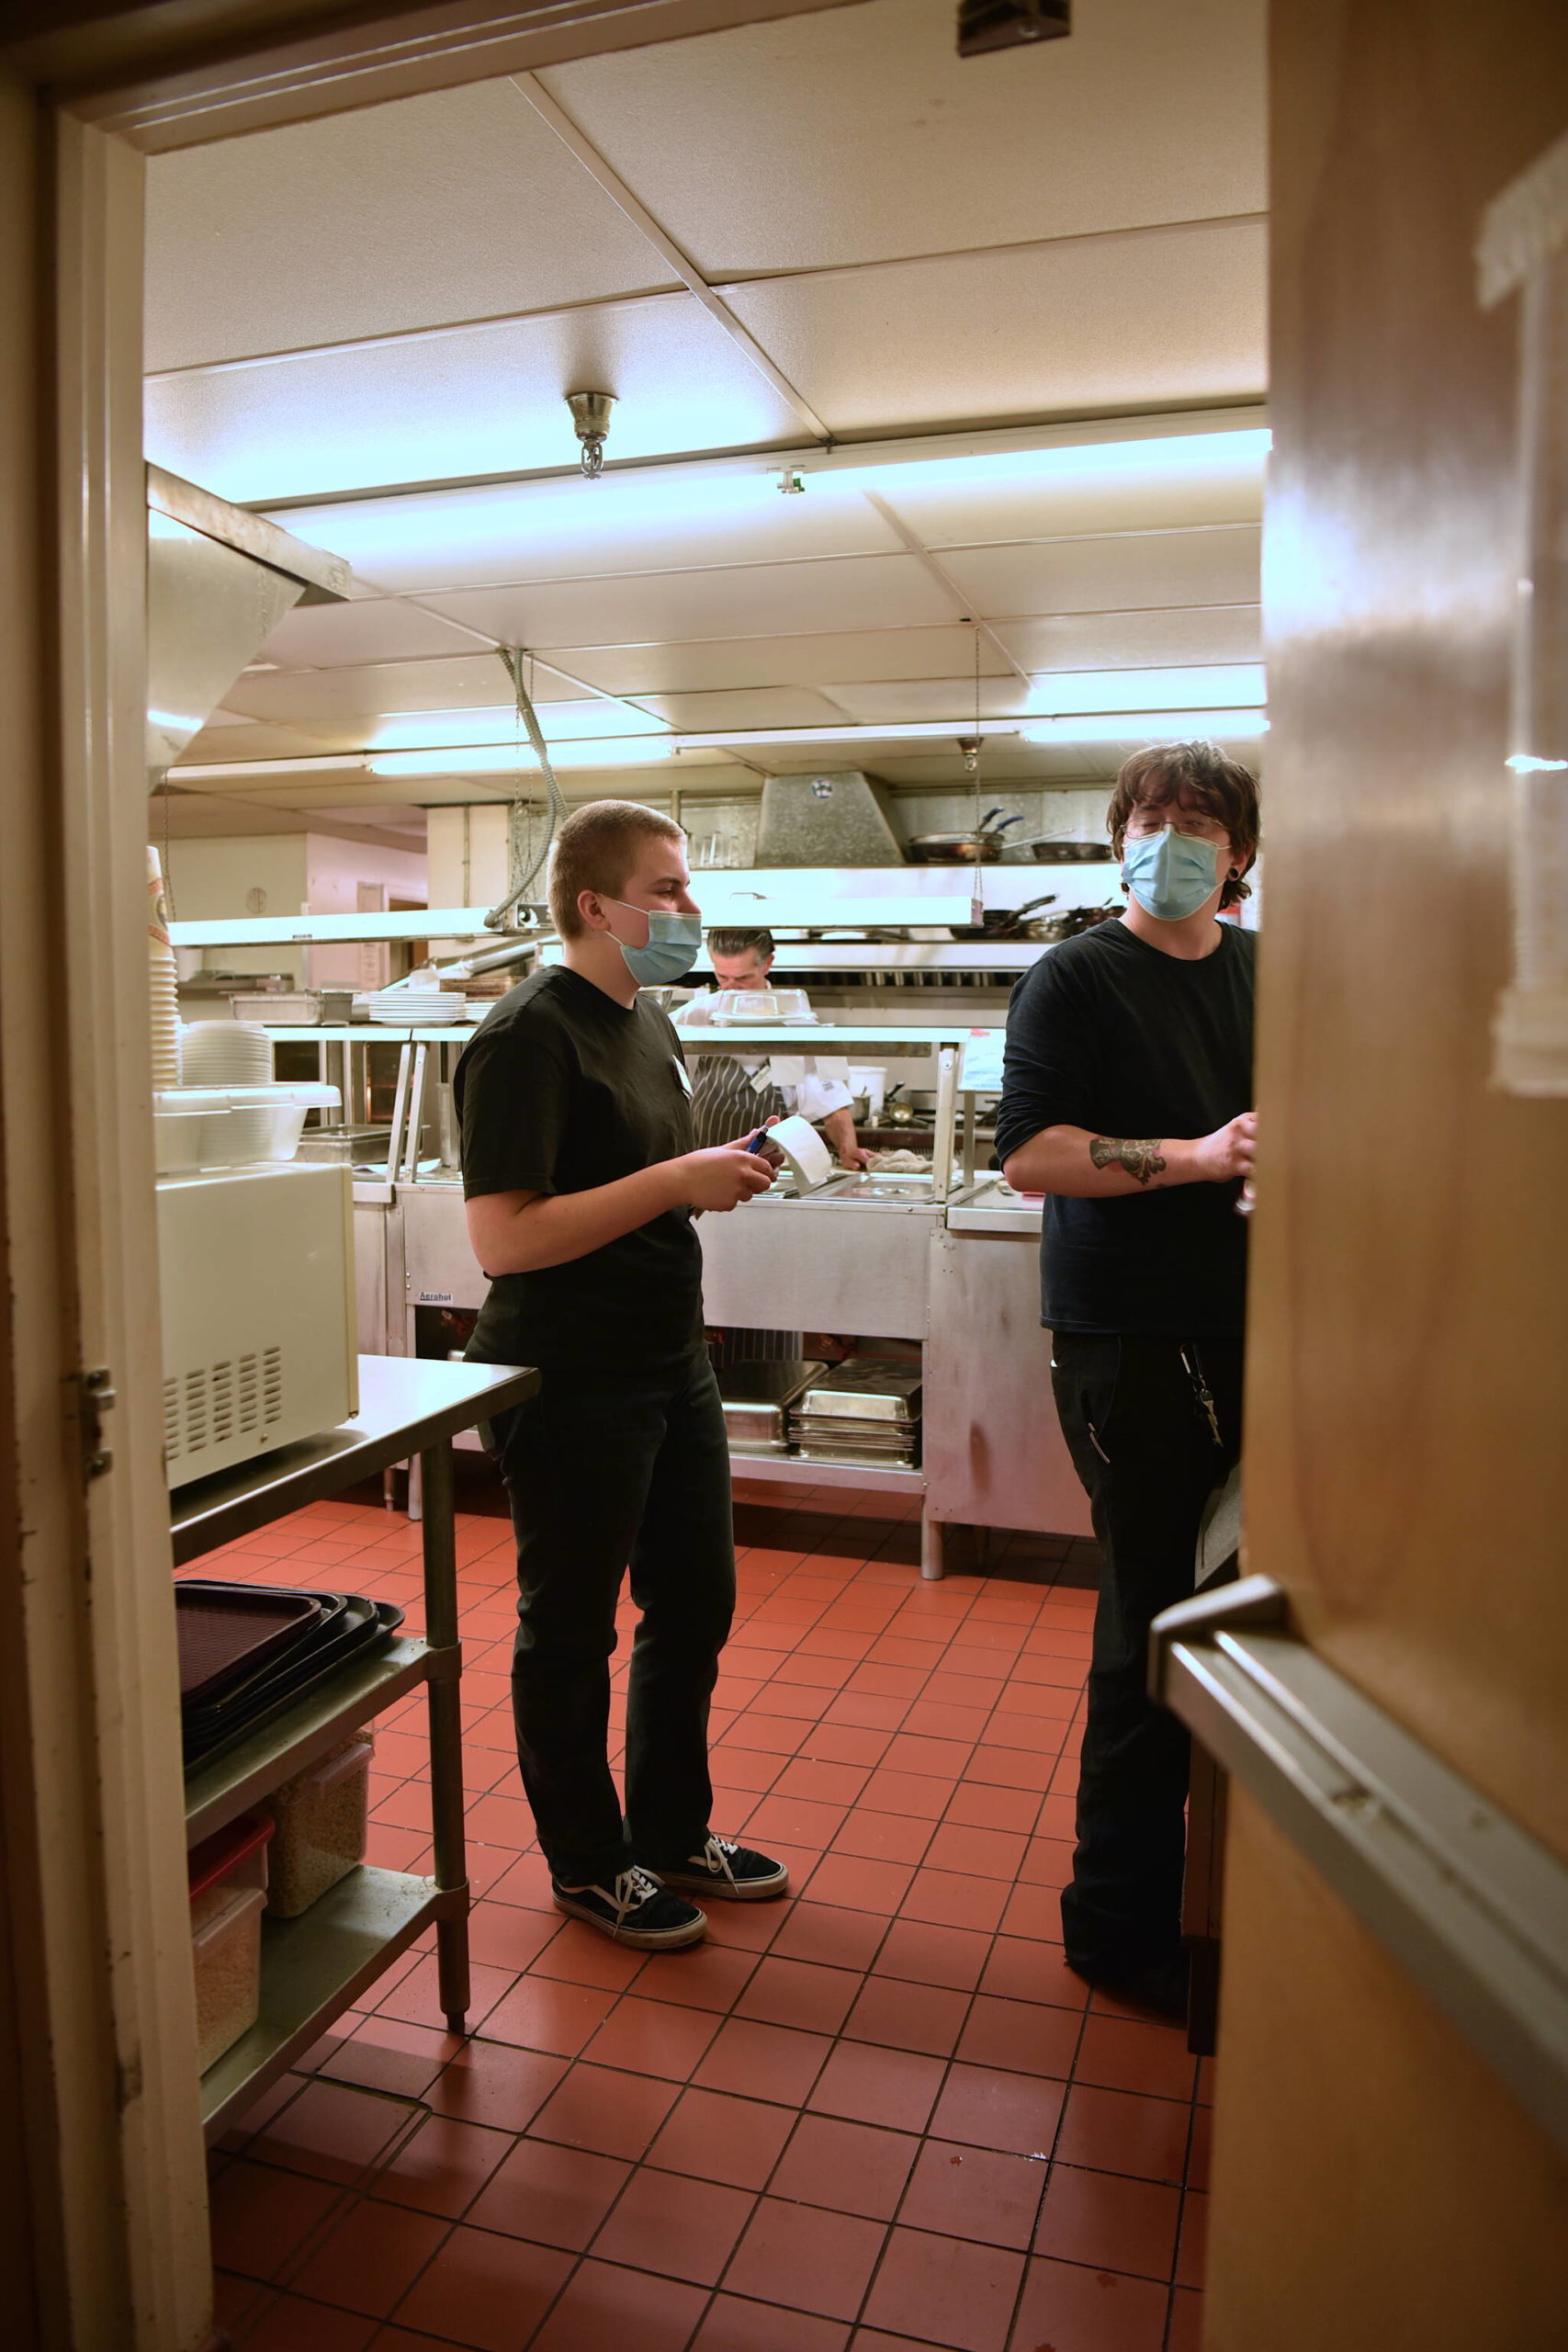 Maggie Rohrbach speaks with a co-worker in the kitchen at the Madison House dining room.